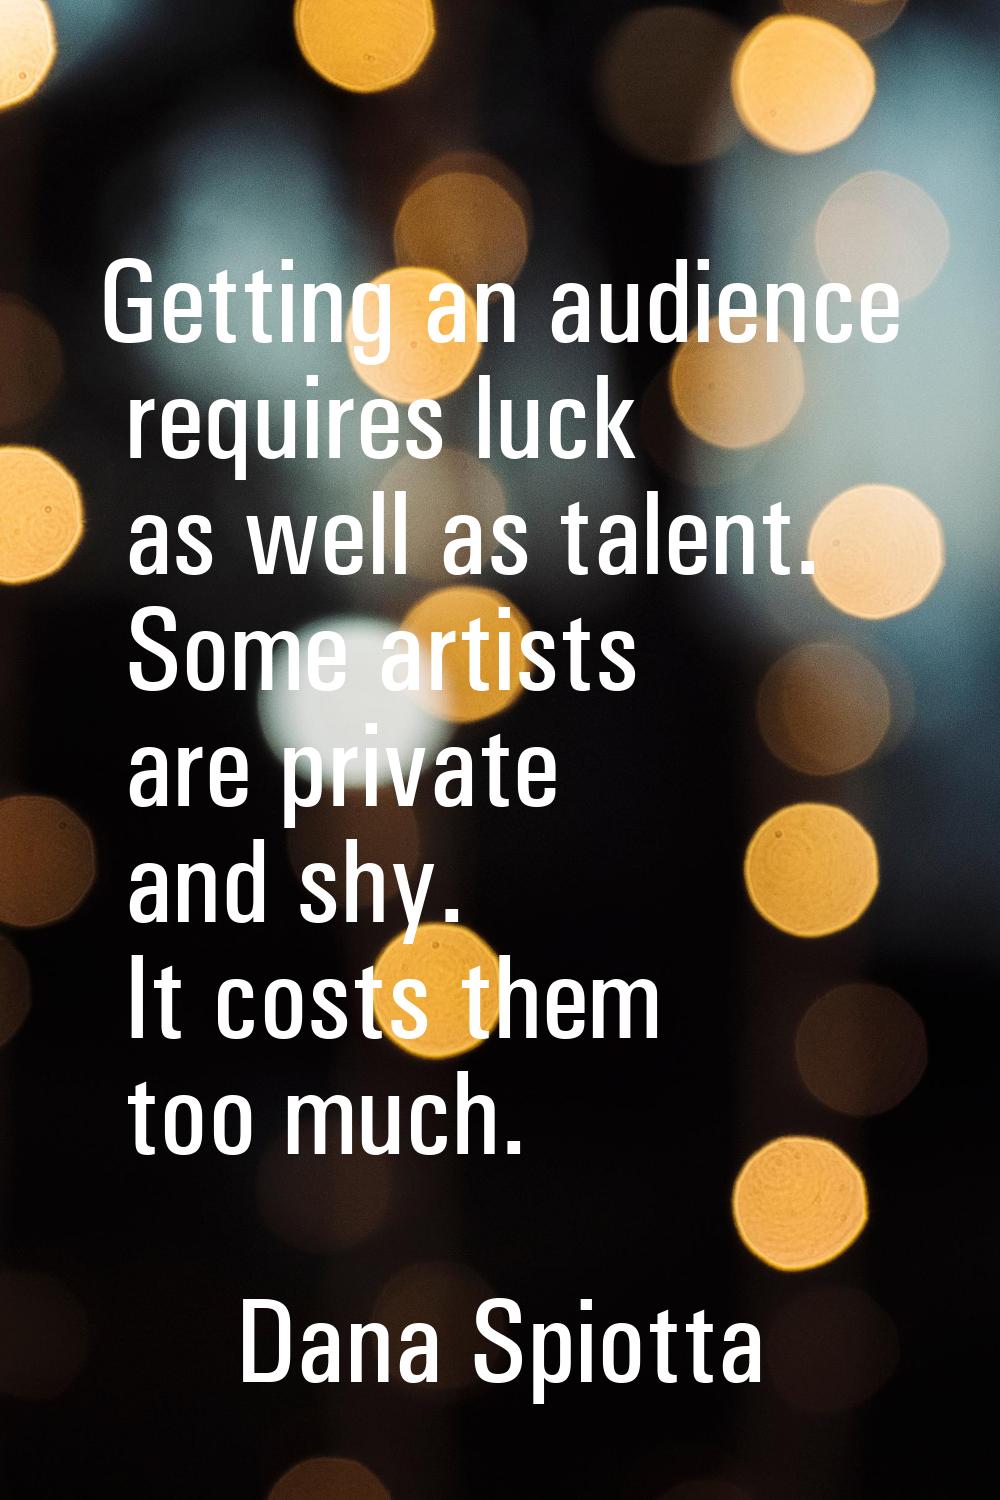 Getting an audience requires luck as well as talent. Some artists are private and shy. It costs the